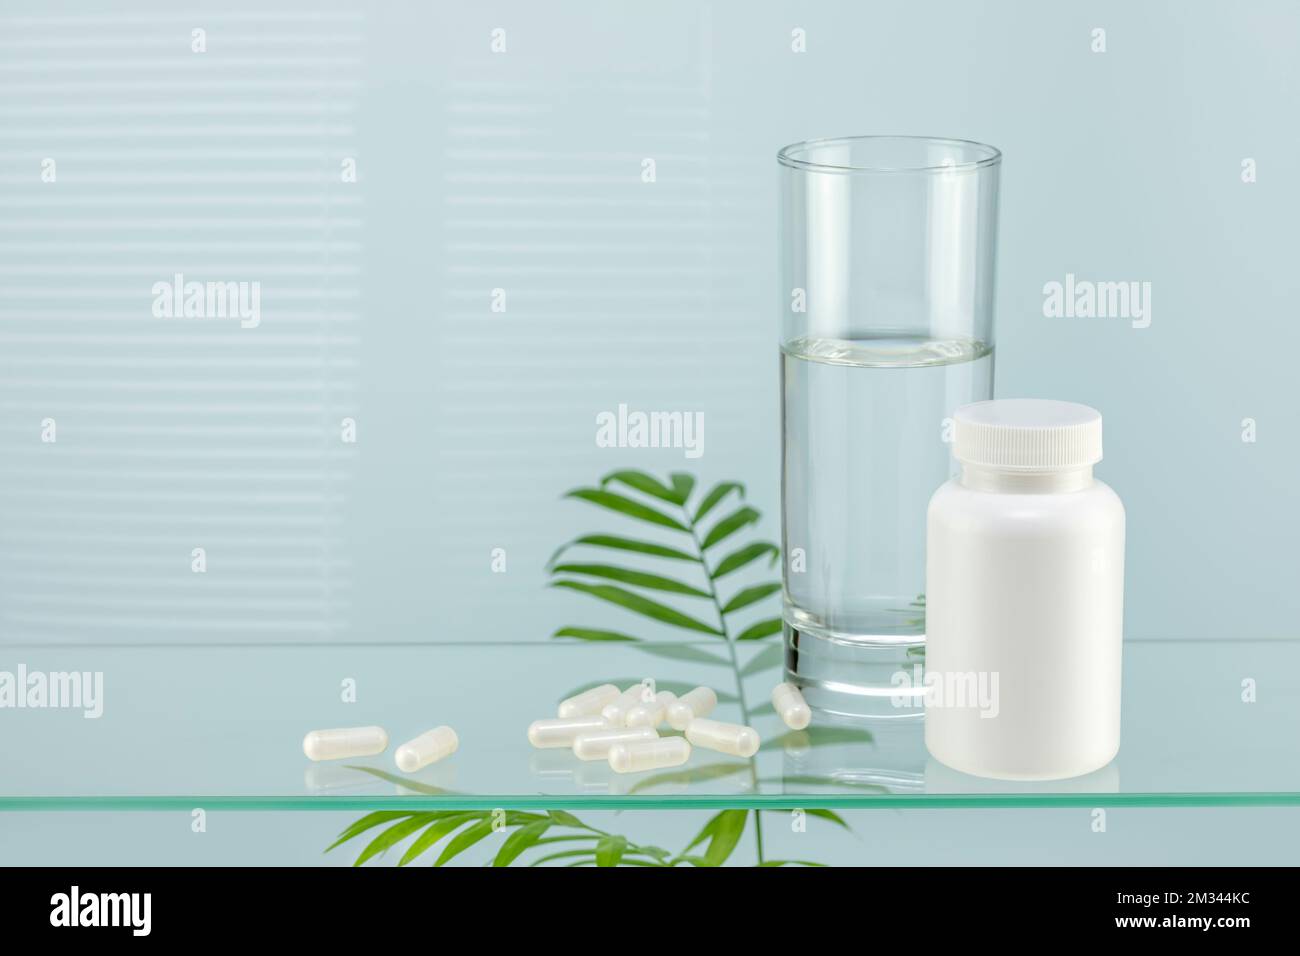 Health care composition with pills and glass of pure water on glass shelf with palm leaves and copy space. Flu season and no virus concept. Mock up of Stock Photo